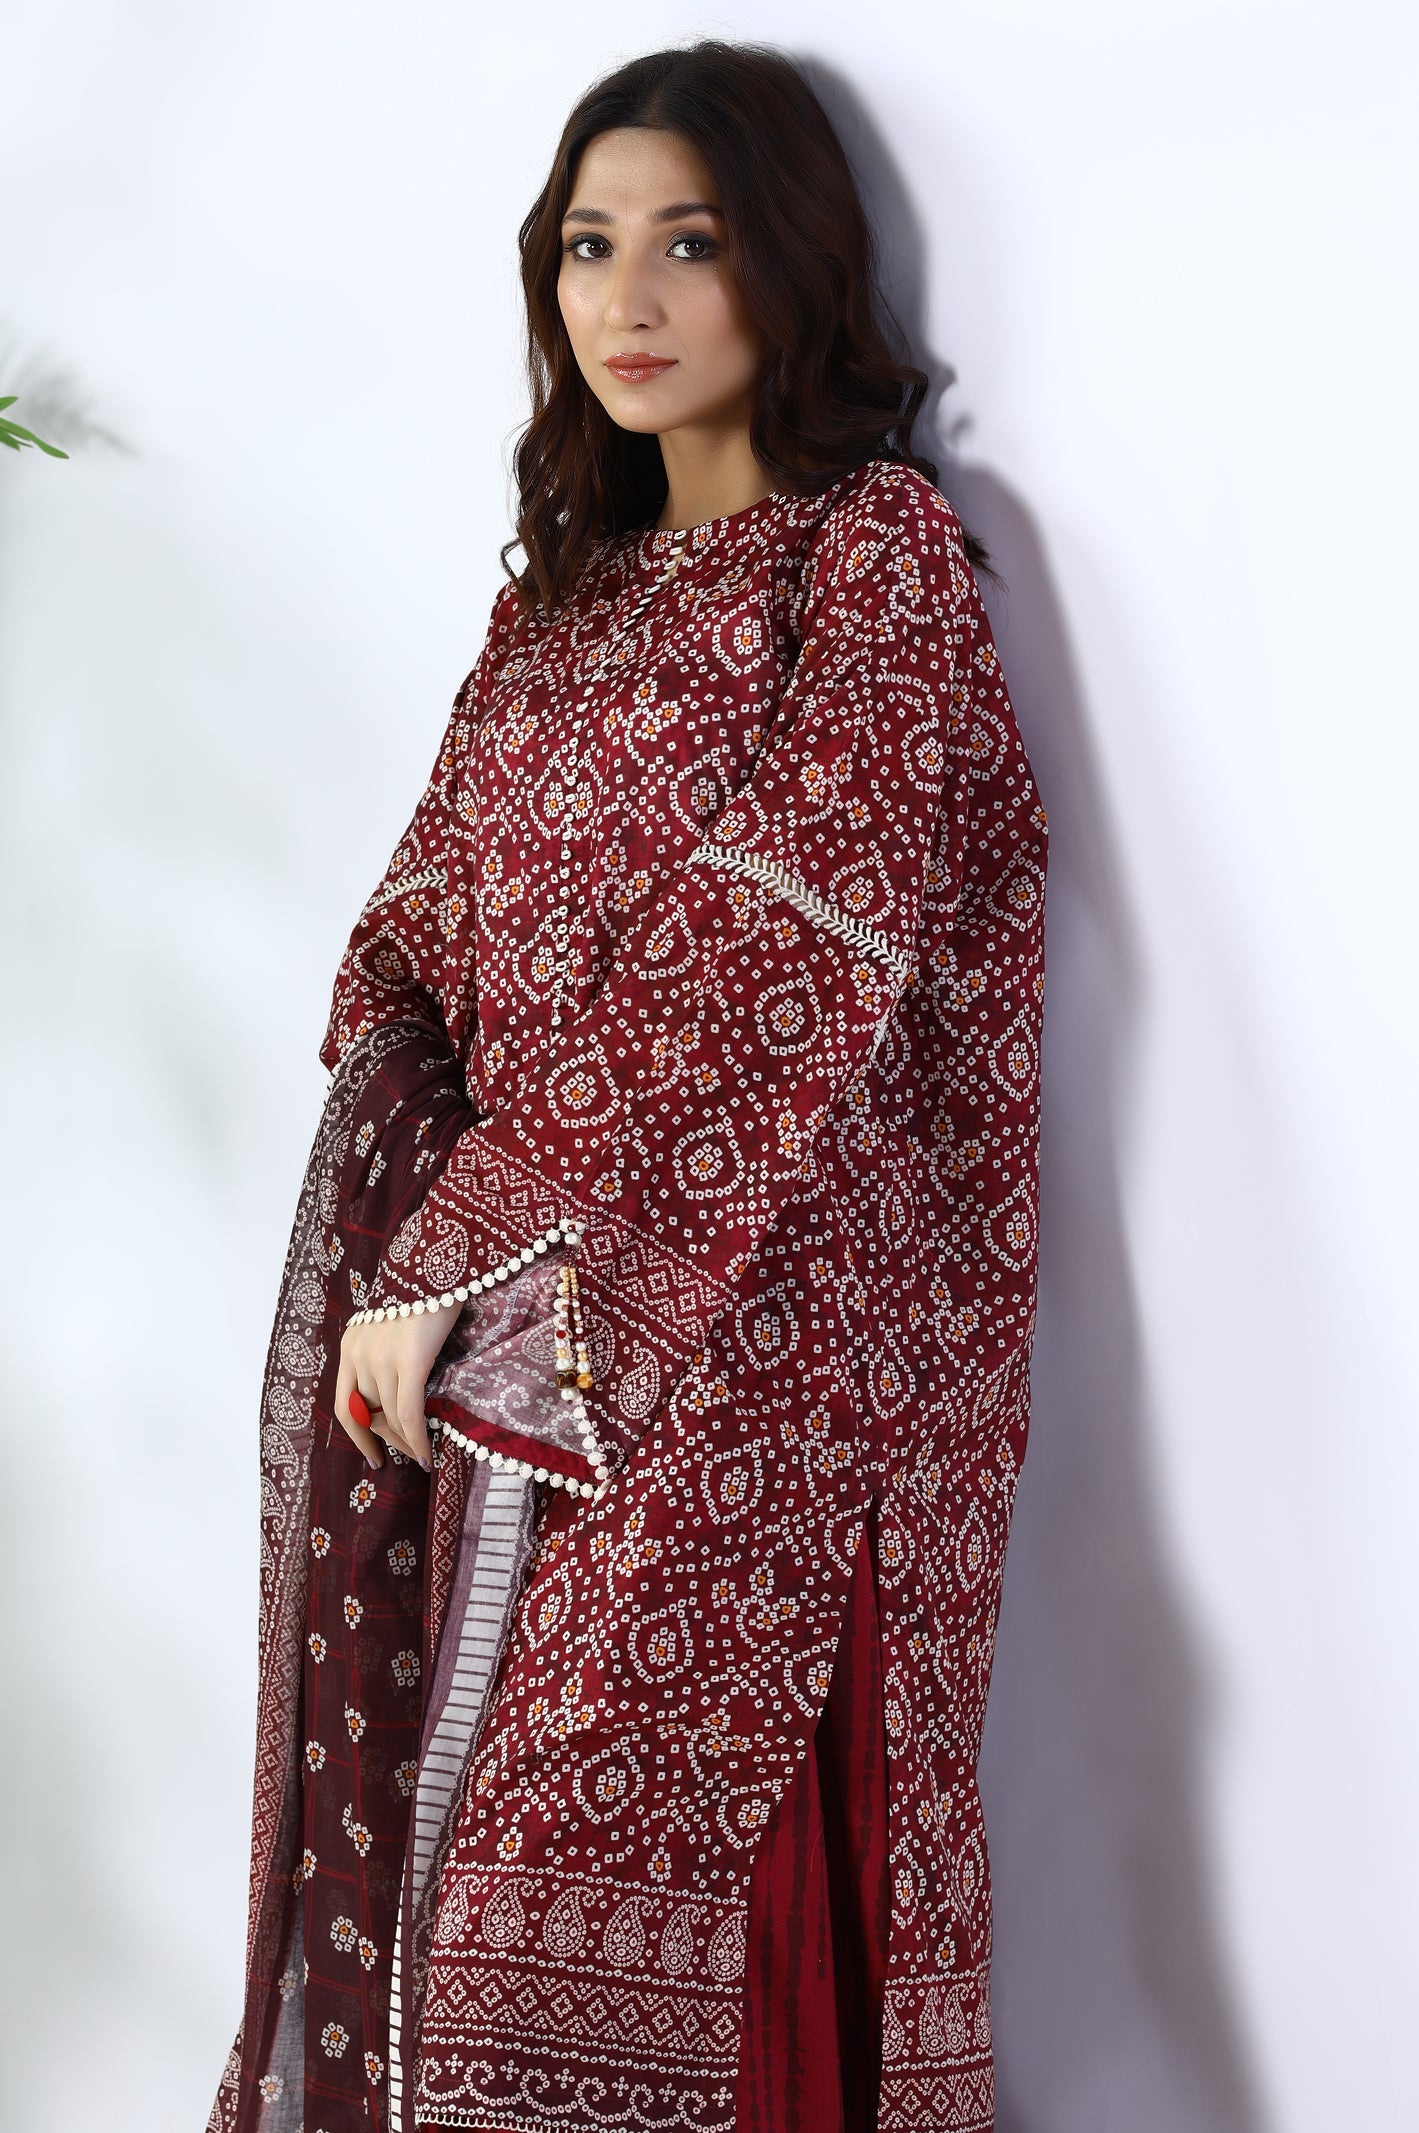 Unstitched 3 Piece Digital Printed Shirt, Printed Dupatta, Dyed Trouser - Diners